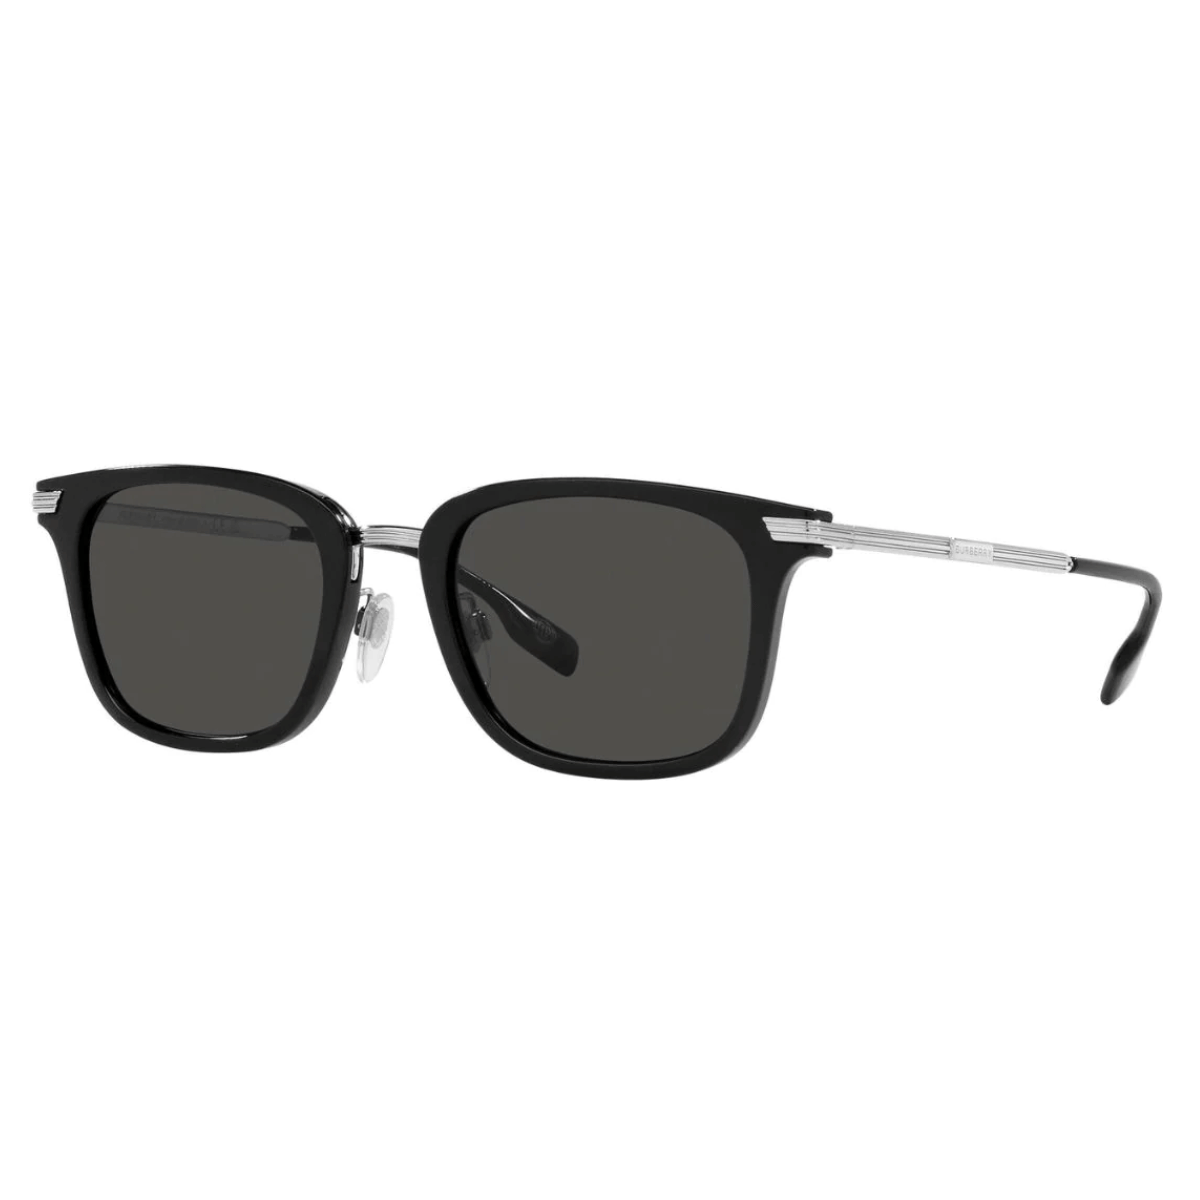 "Shop our collection of stylish Burberry BE4329F sunglasses for men at Optorium: Top-rated square-shaped shades, perfect for enhancing your look."